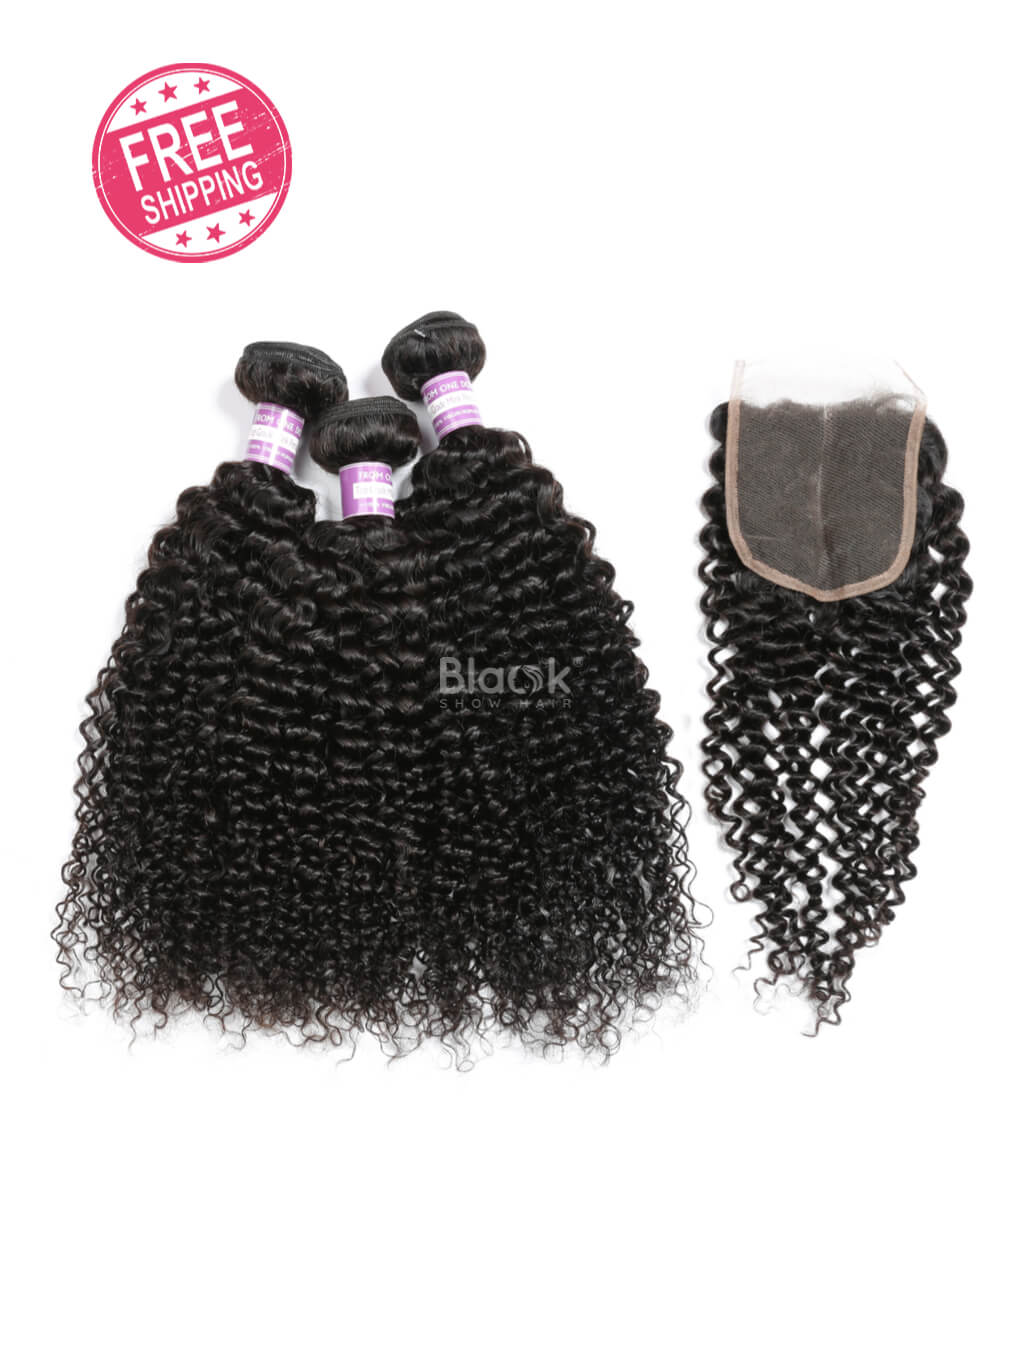 curly weave bundles with closure 4x4 peruvian hair